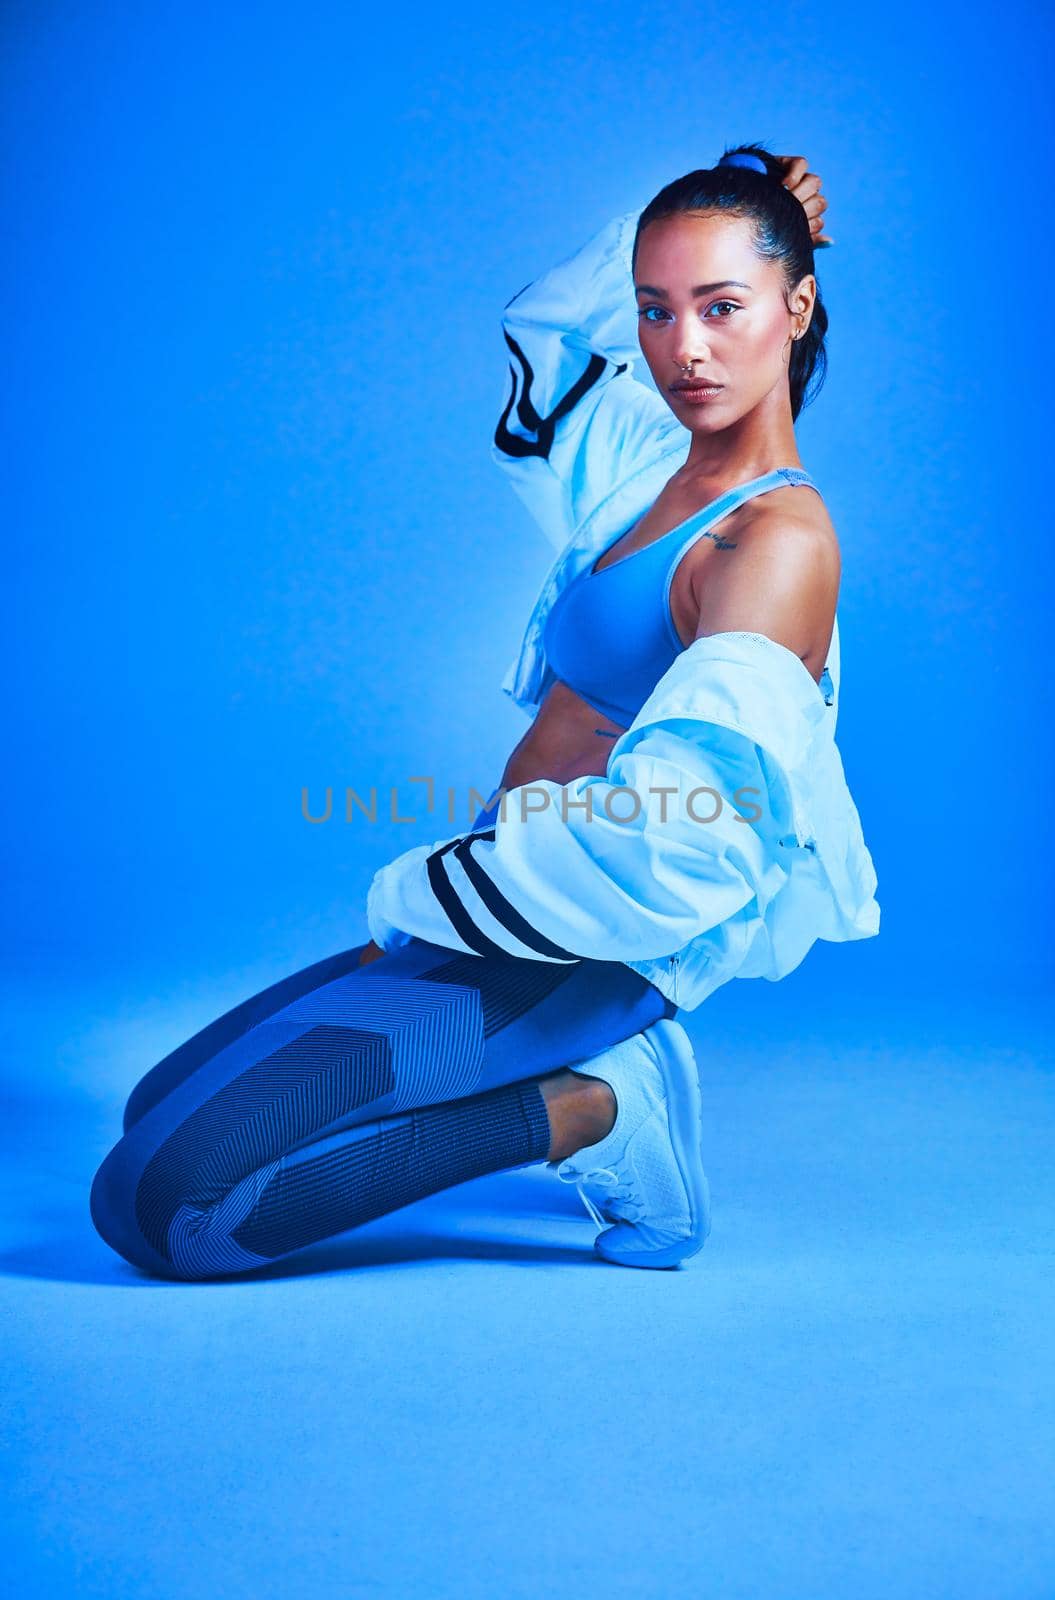 Full length portrait of an attractive young female athlete posing on her knees against a blue background.